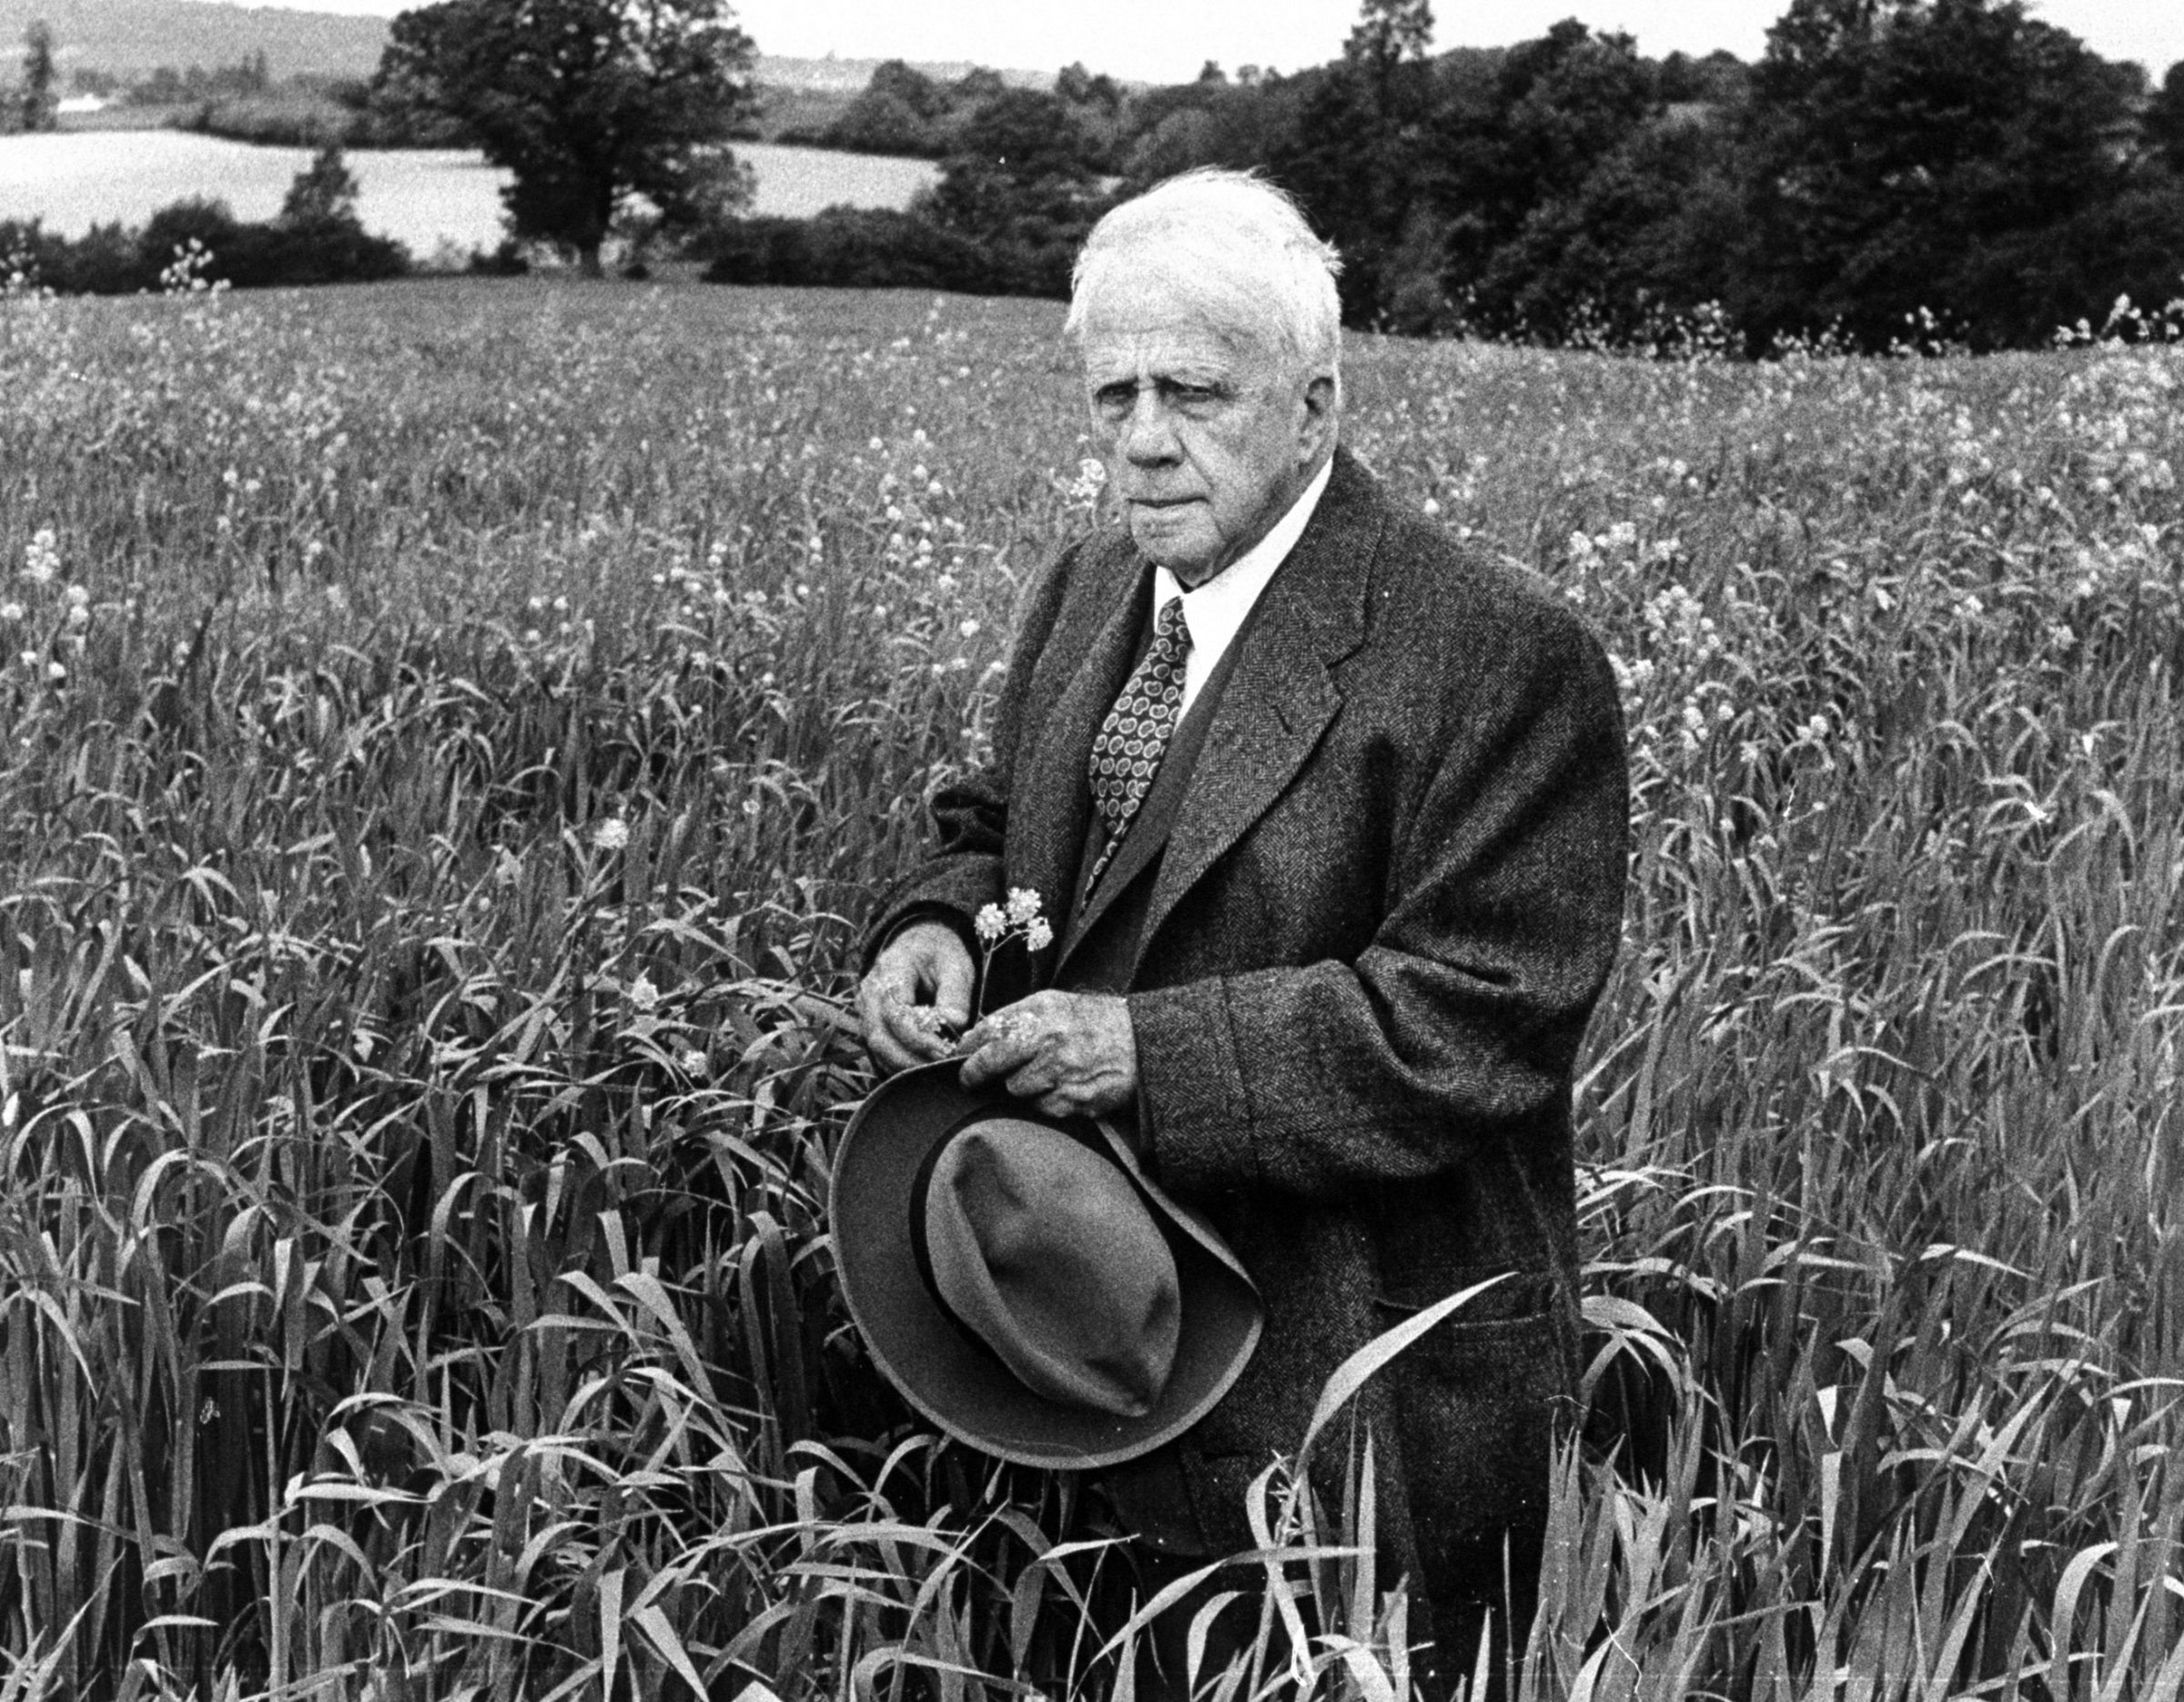 Robert Frost in an English meadow, 1957.